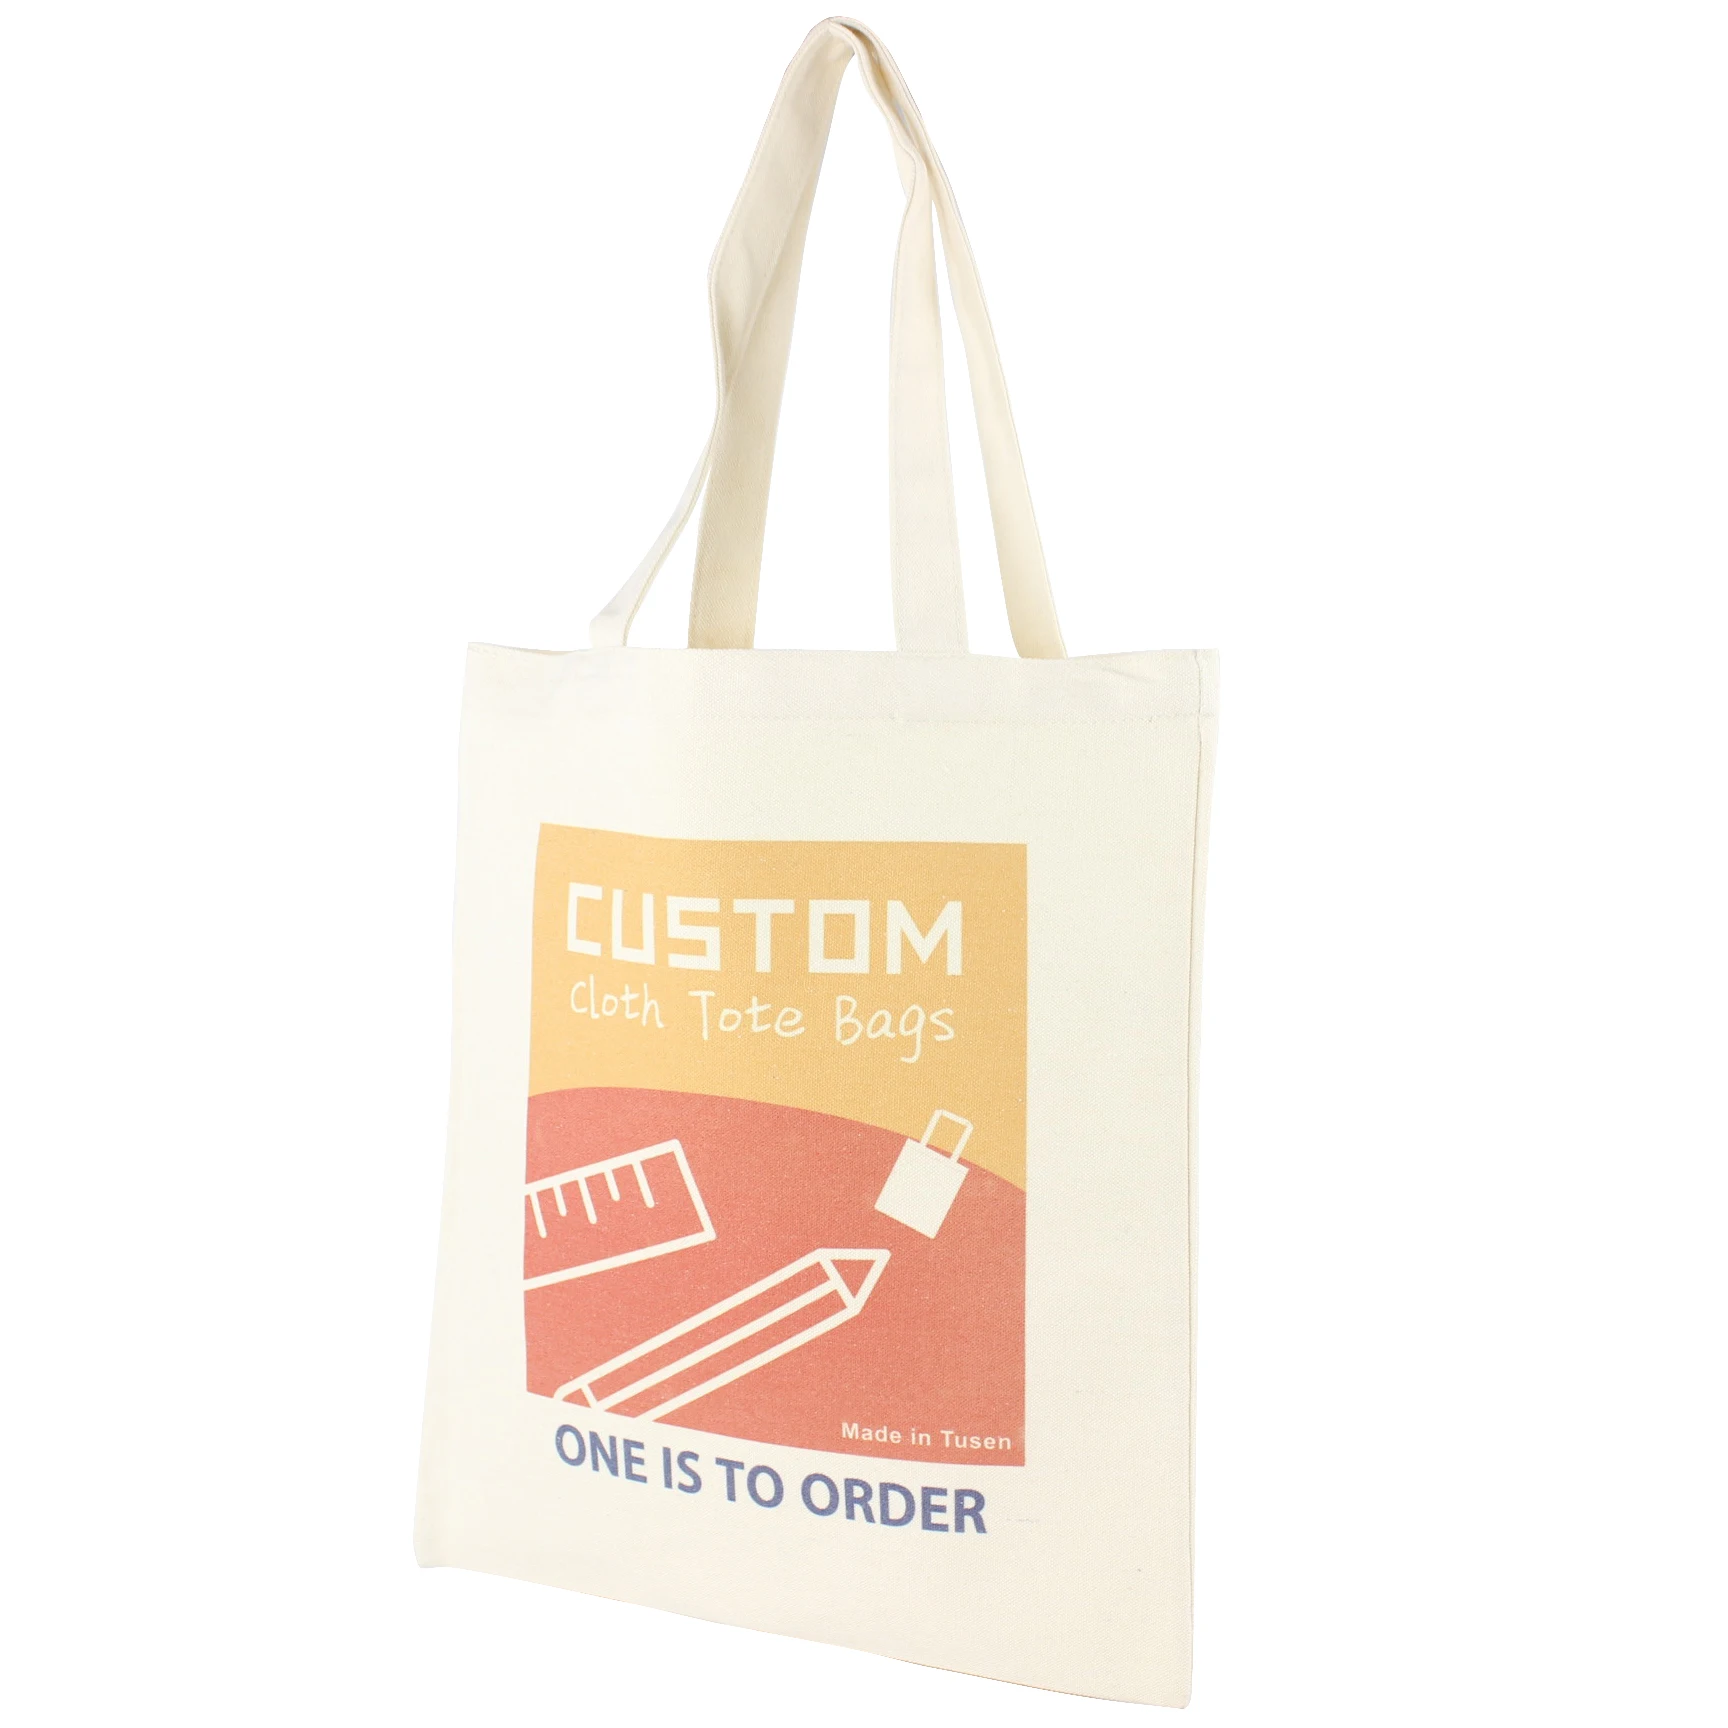 

Creamy White Customized on Demand Reusable Cotton Canvas Totebag with Printed Logo Custom Tote Bags